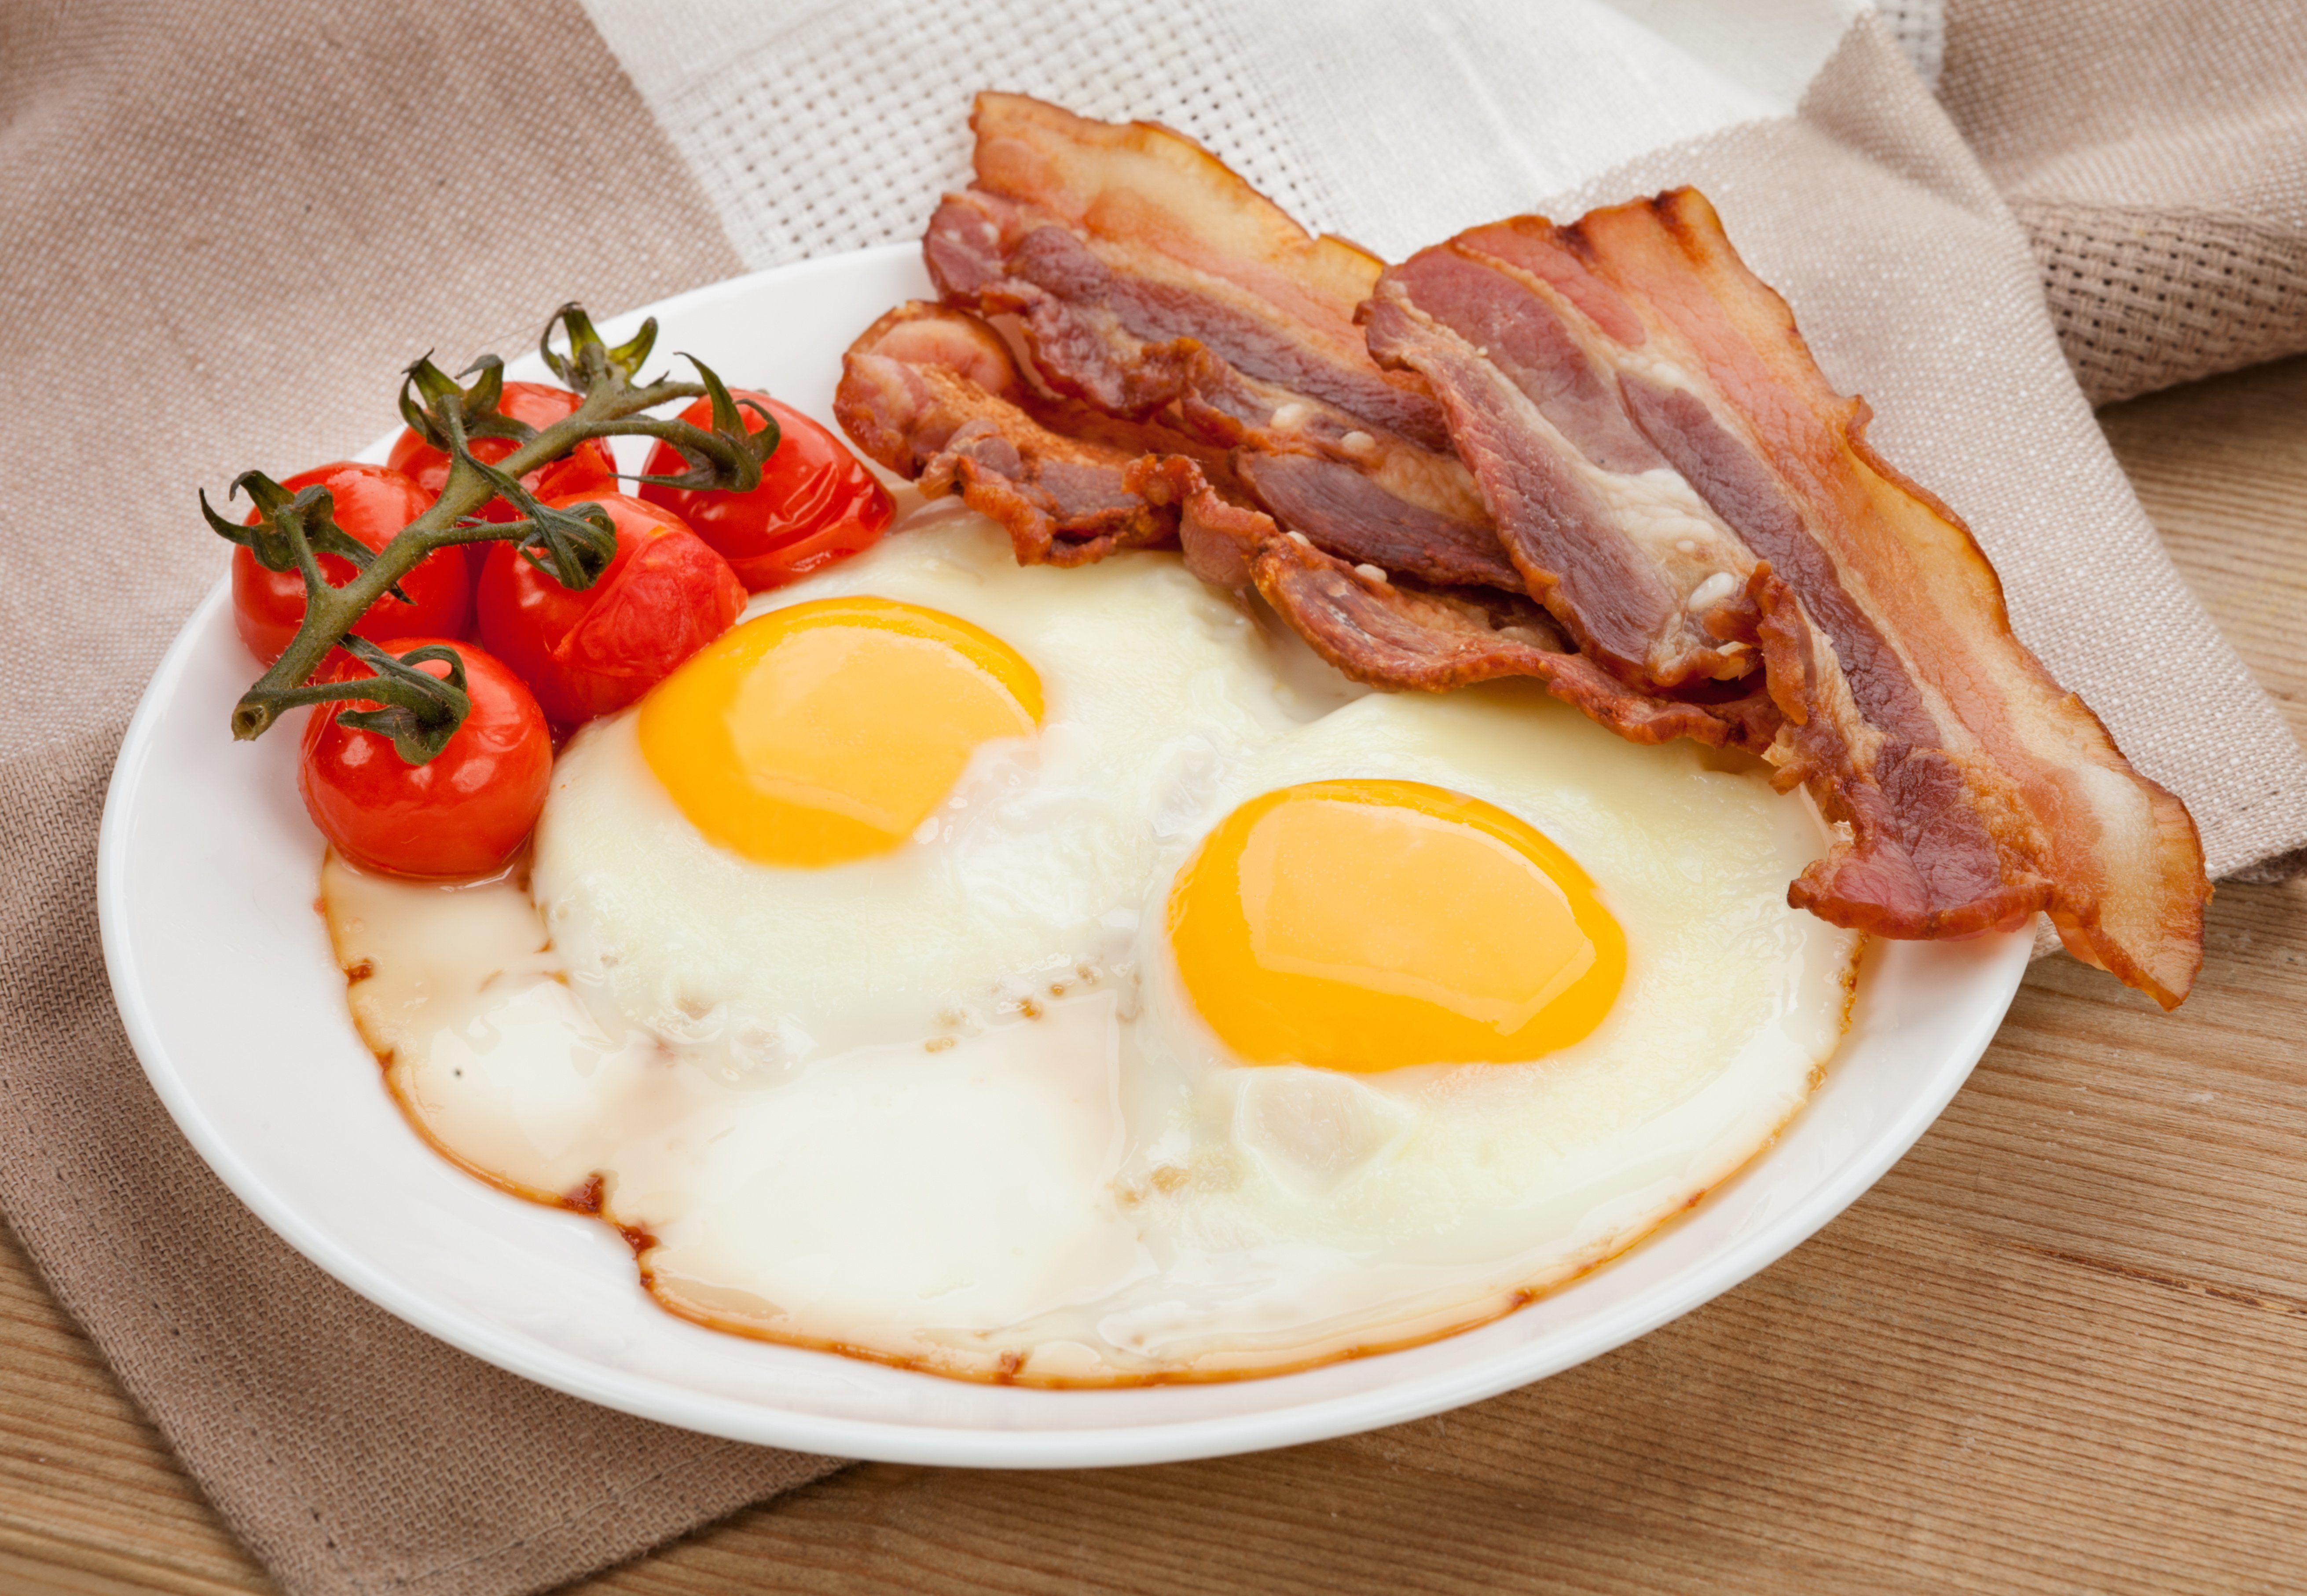 Cute Eggs And BaconWallpapers